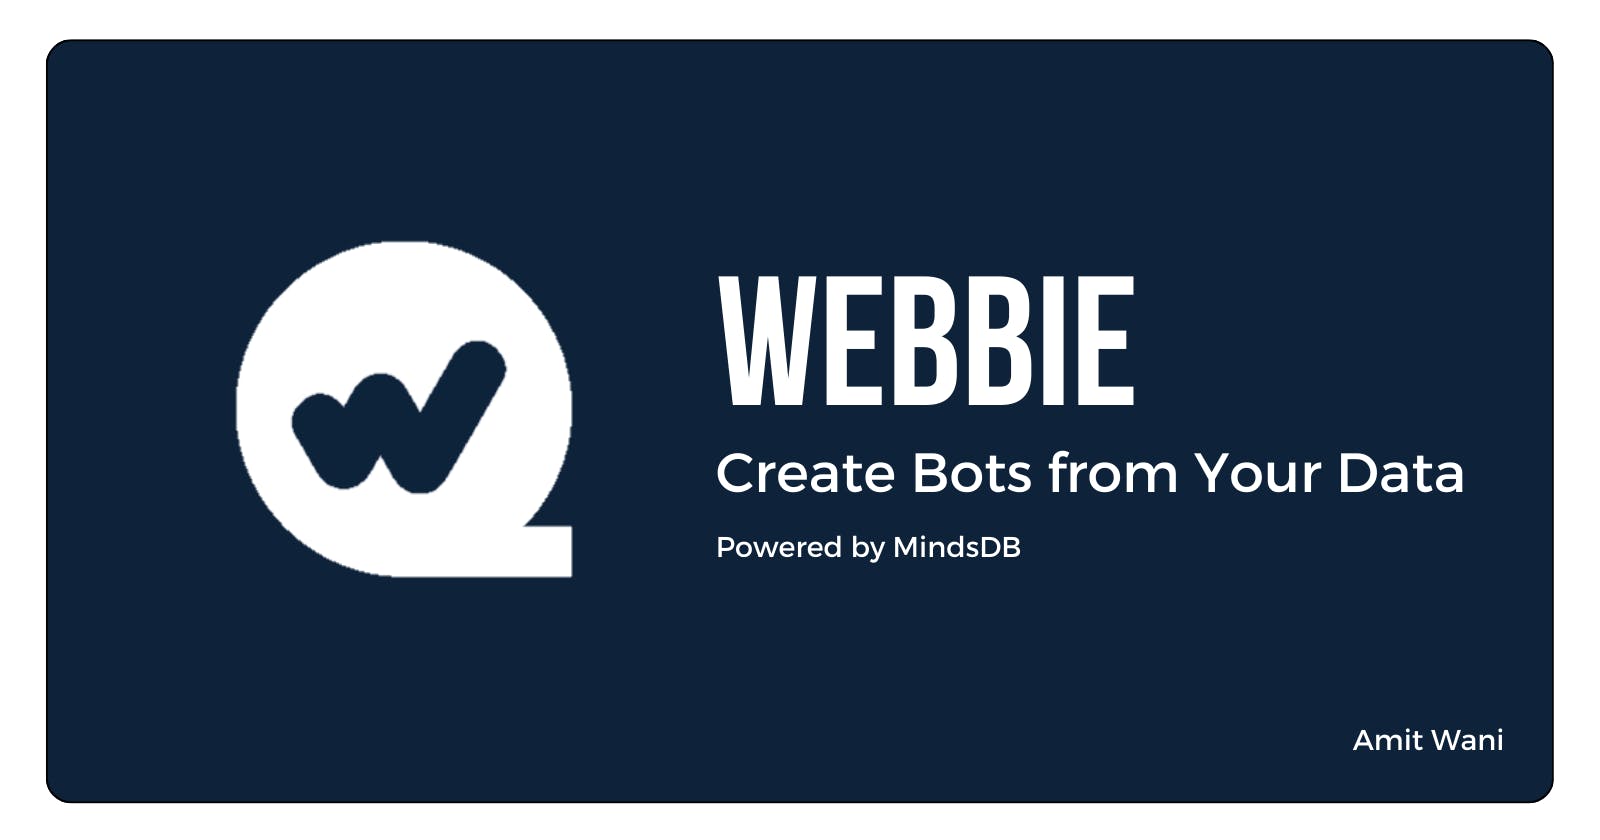 Webbie - Create Bots from Your Data using MindsDB in minutes !